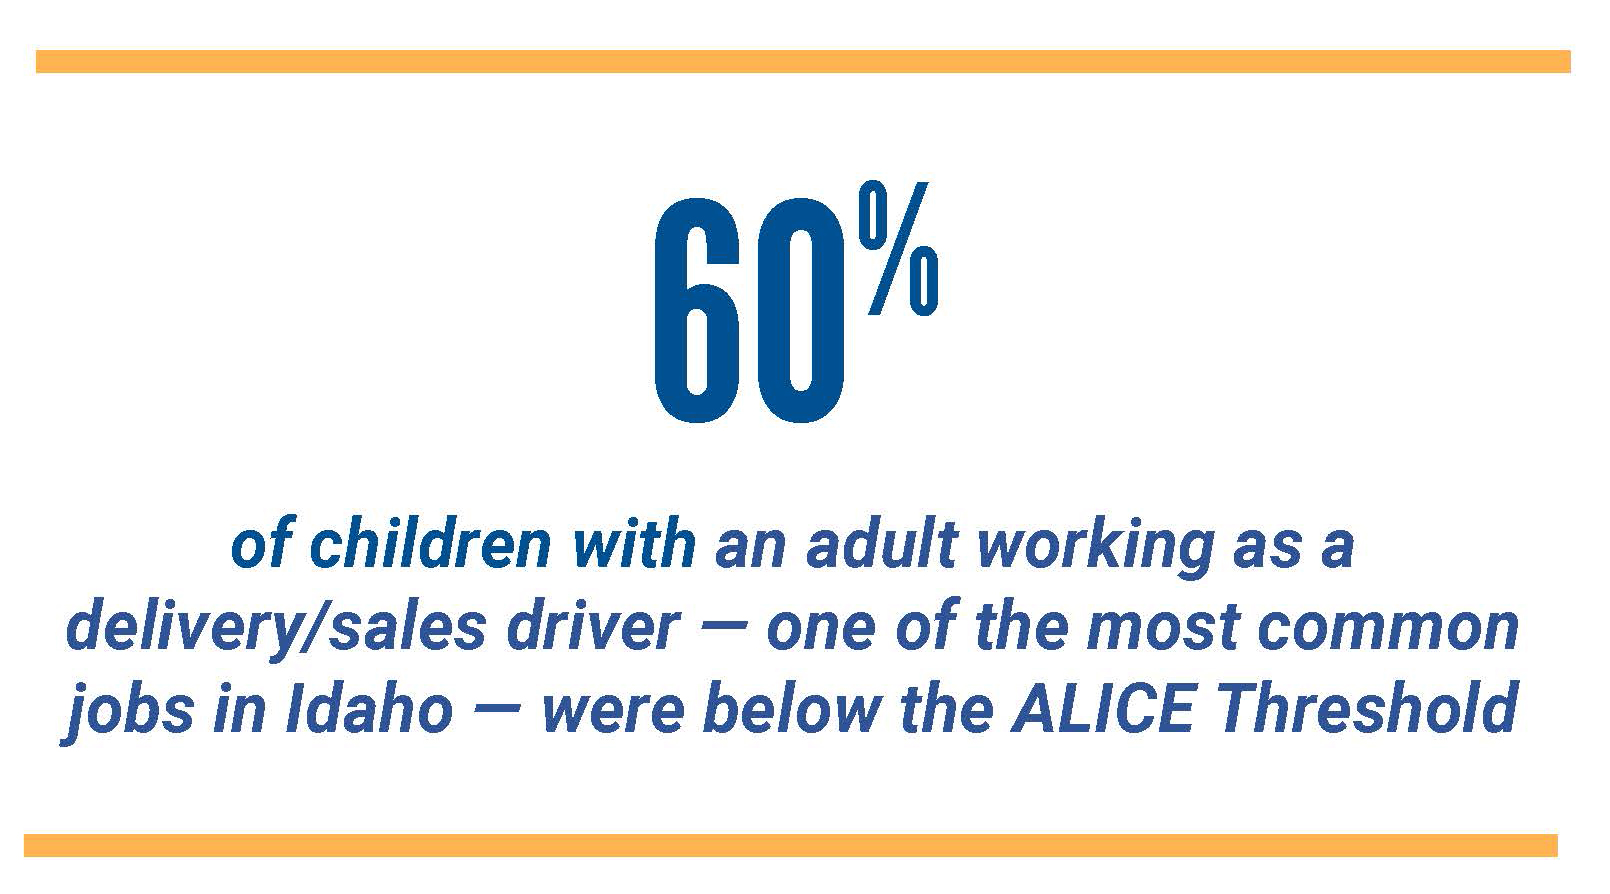 60% of children with an adult working as a delivery/sales driver - one of the most common jobs in Idaho - were below the ALICE threshold